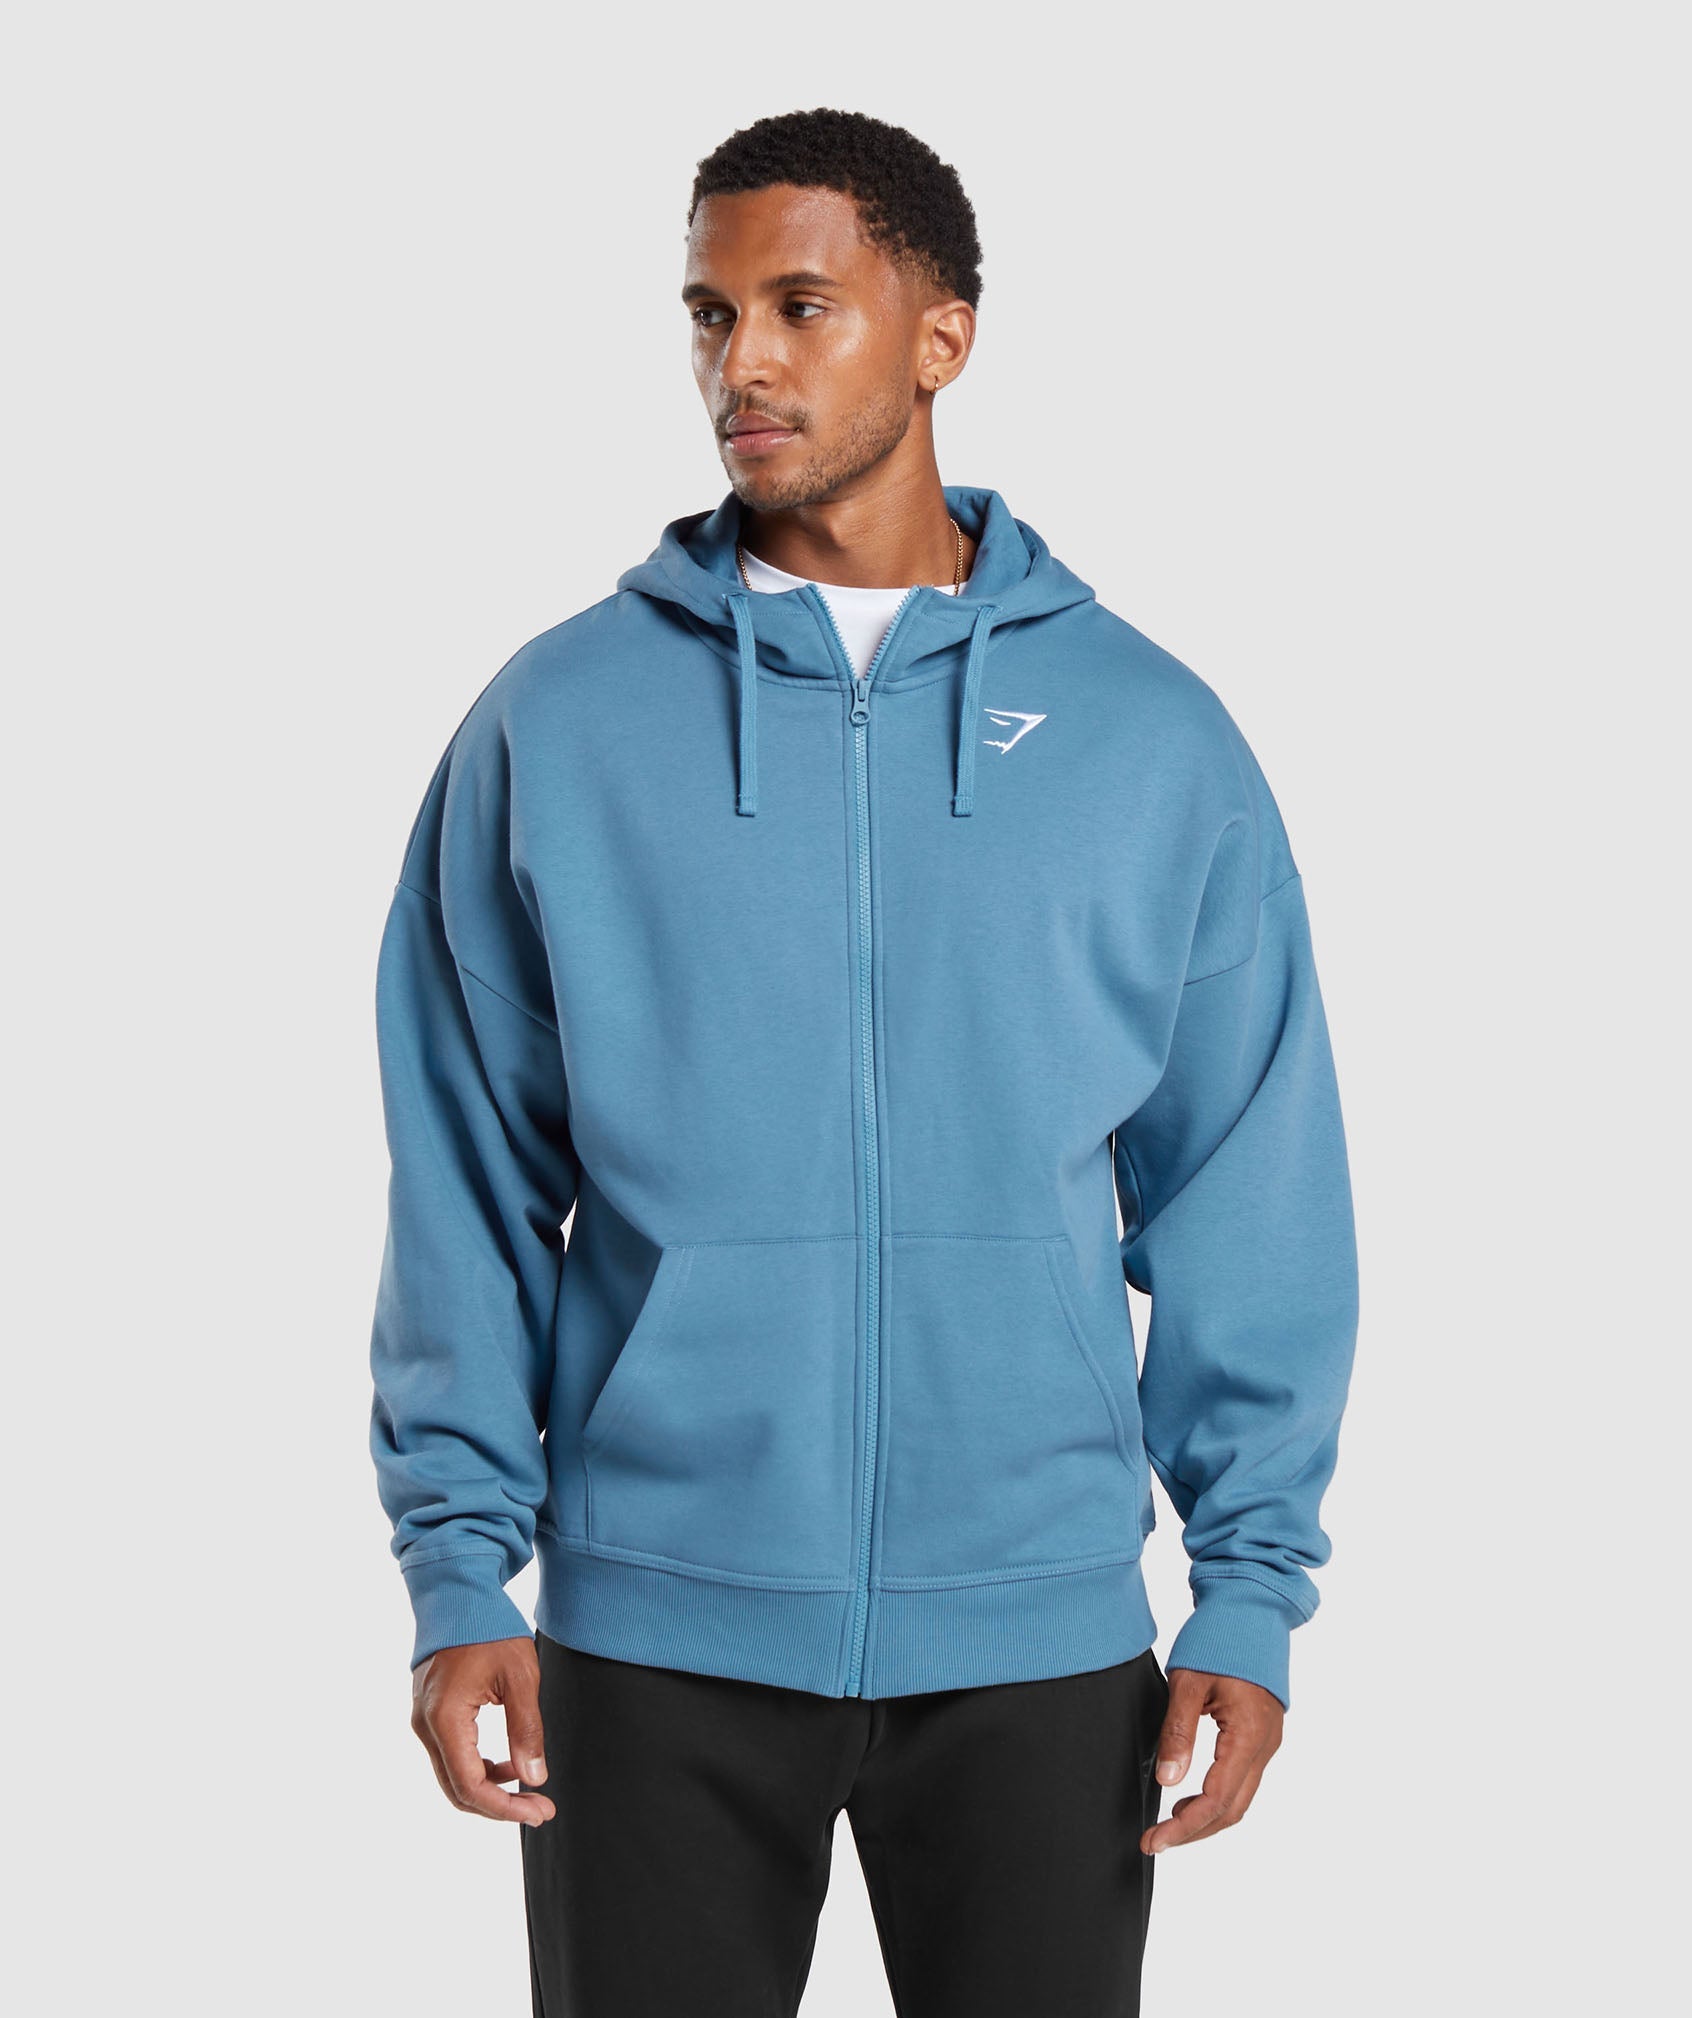 Gymshark Men's Critical Athletic Pull Over Hoodie Blue Geometric